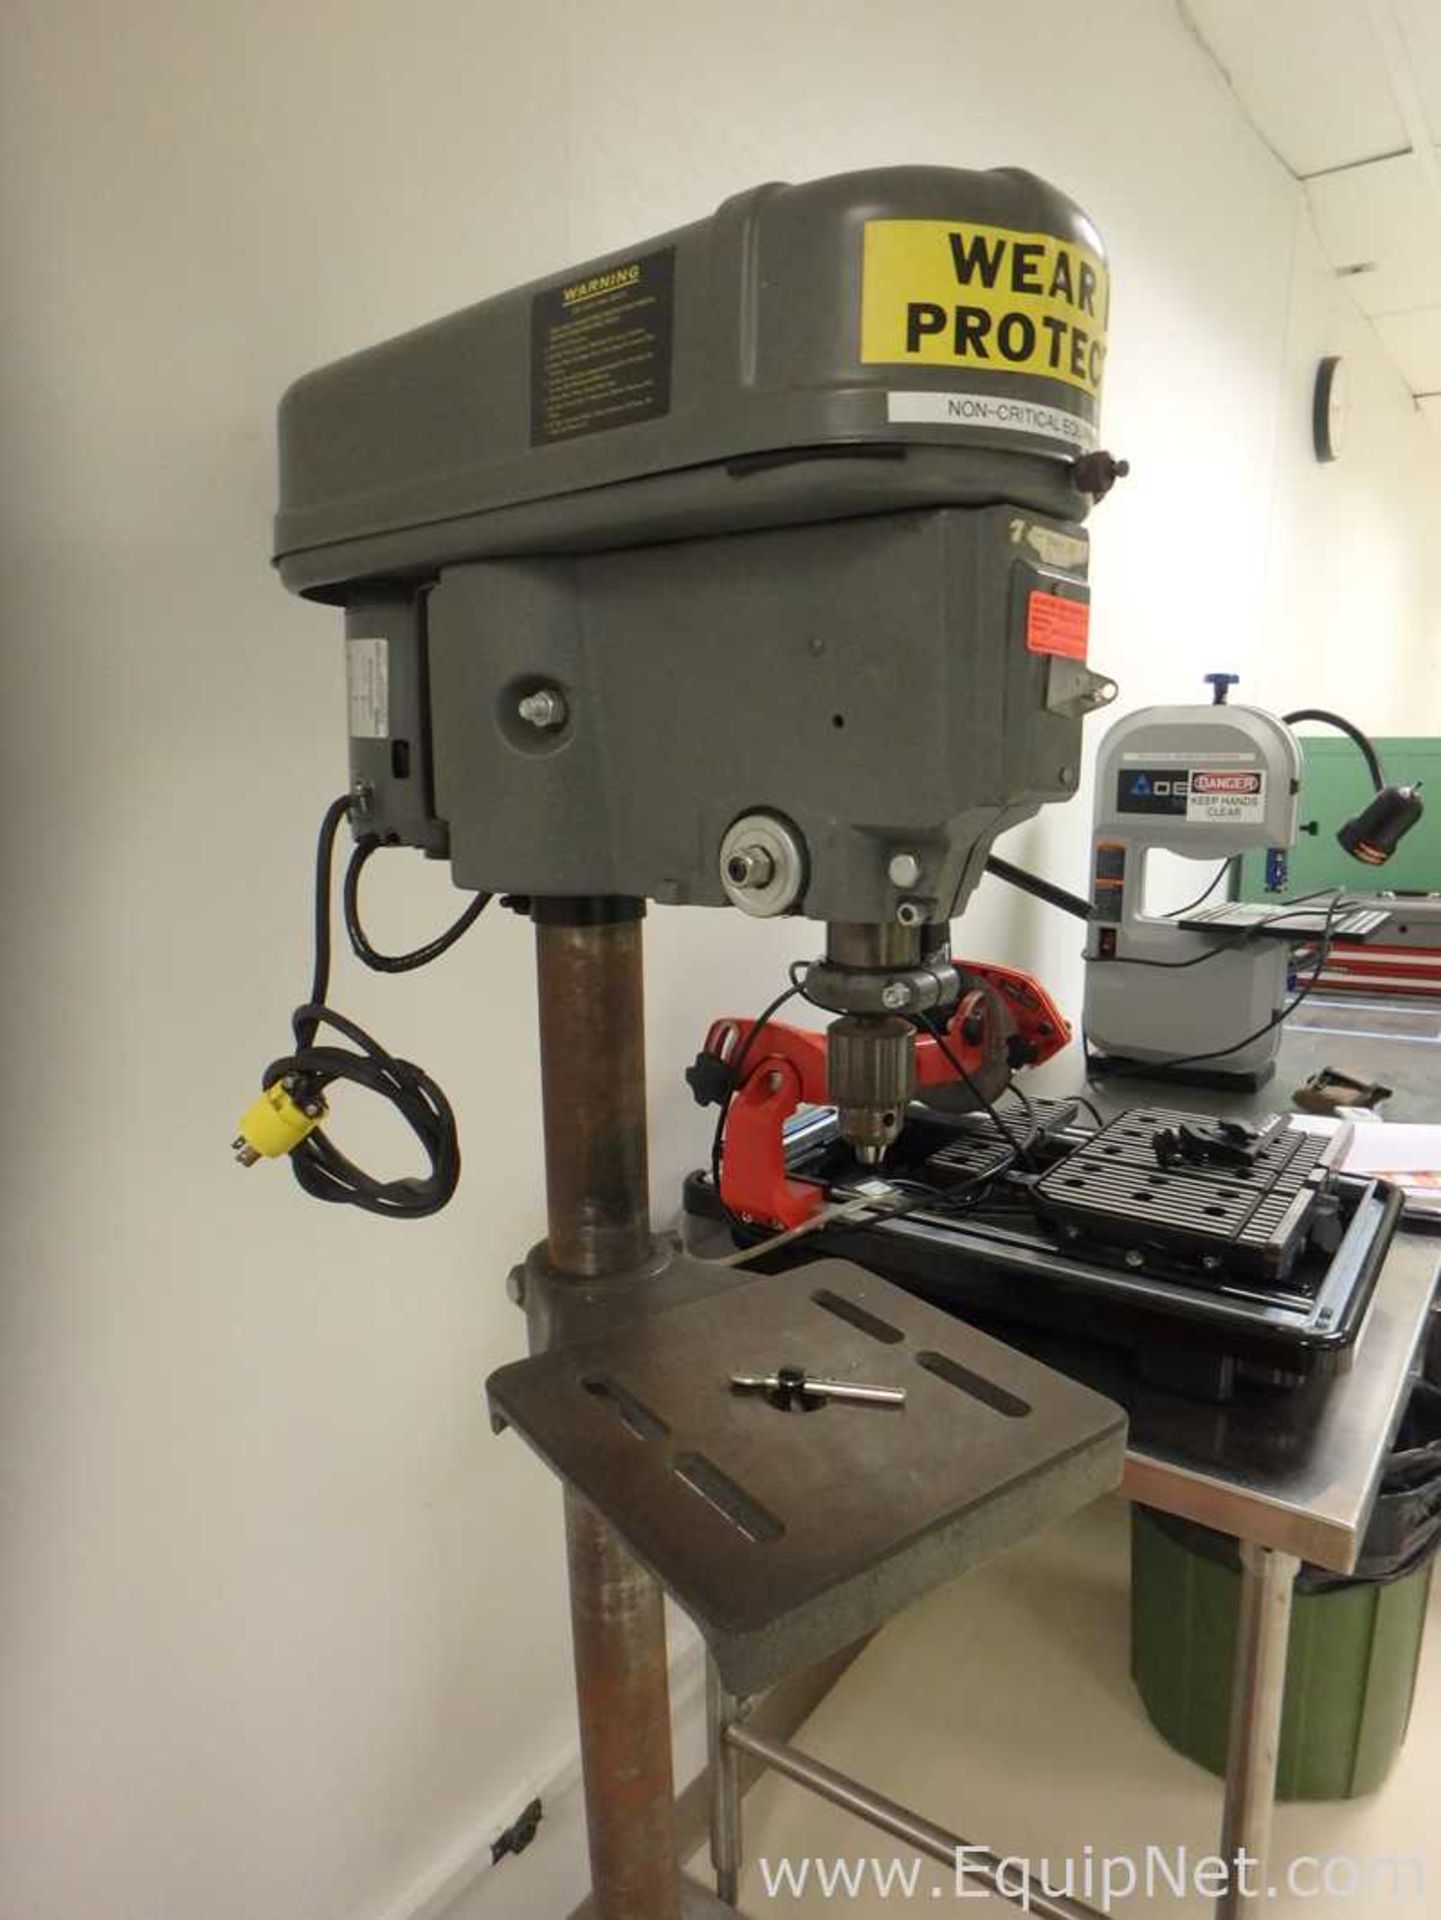 Rockwell Automation 15-081 Drill Press - Image 2 of 6